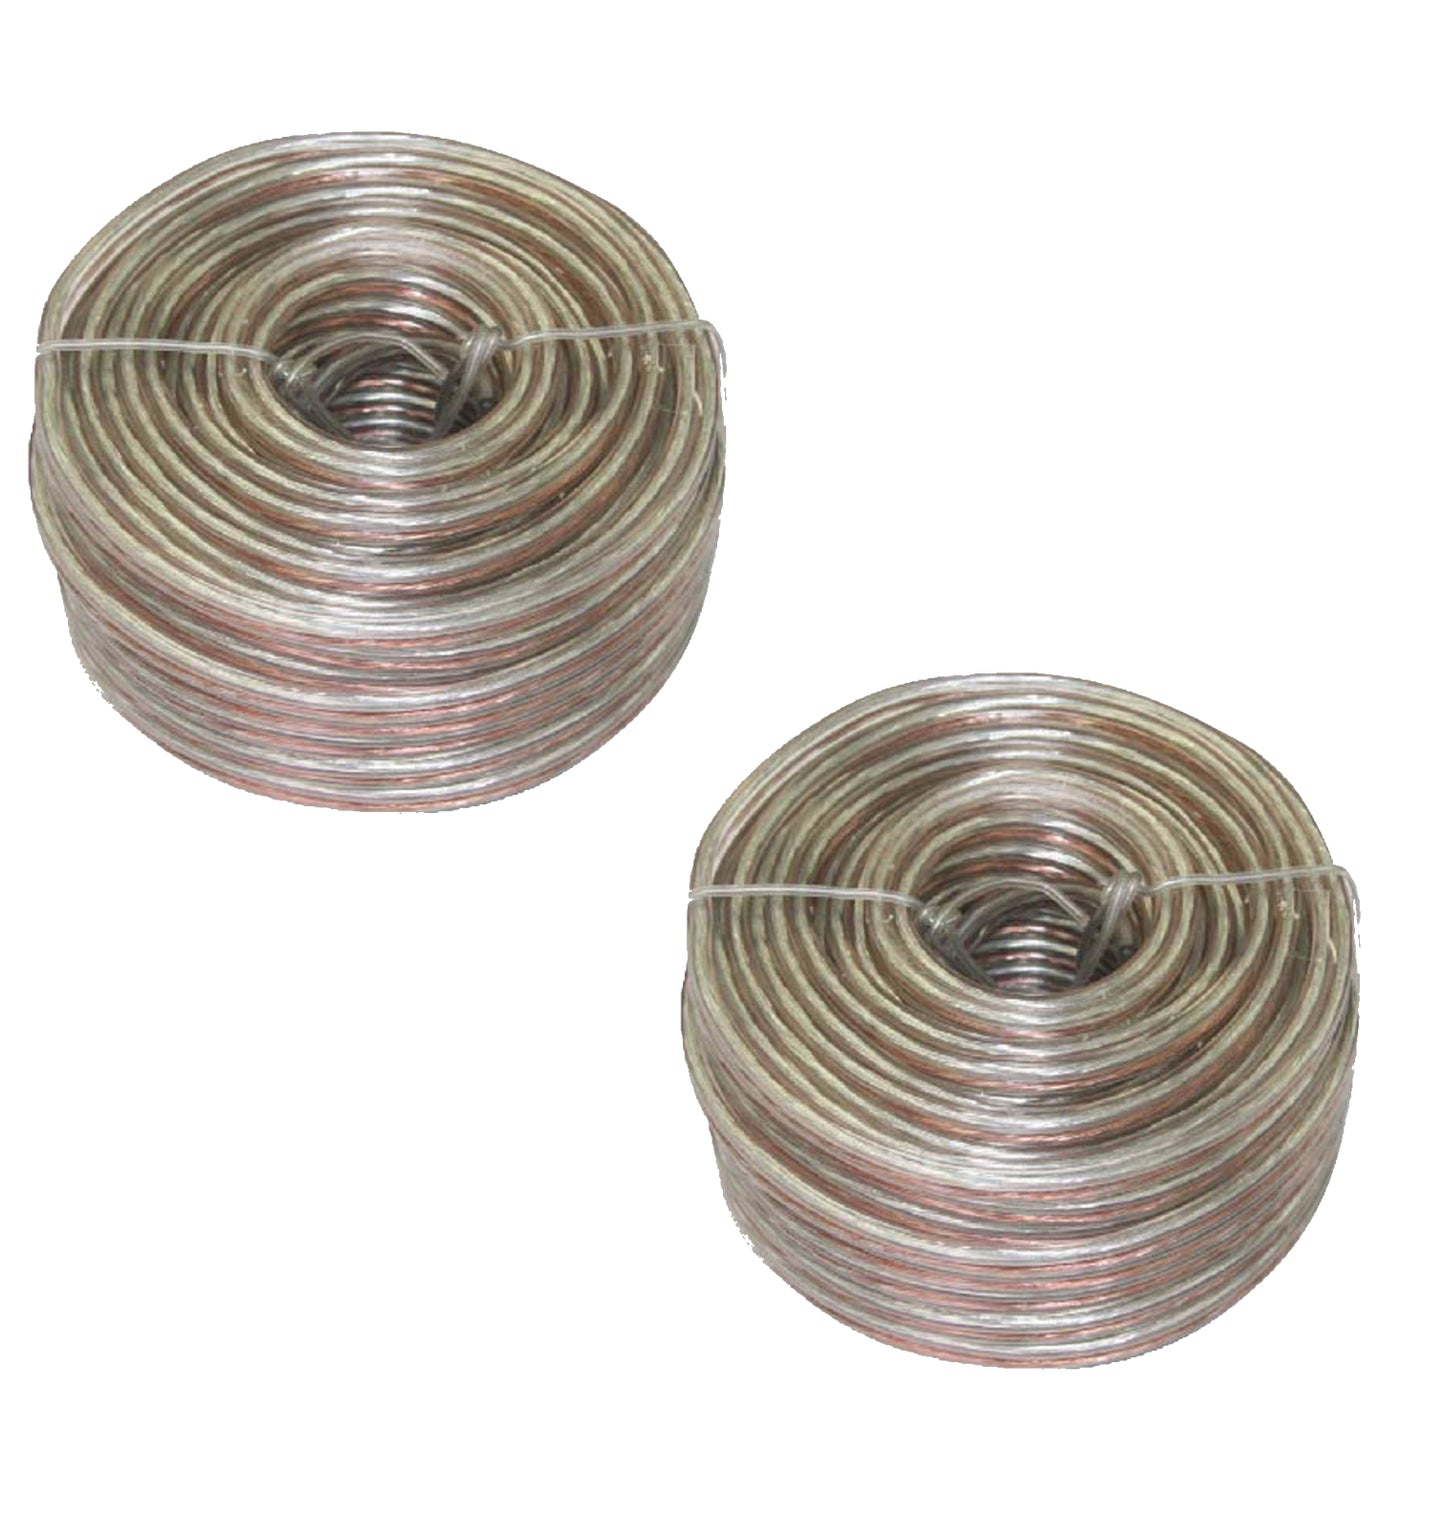 Trisonic 18 Gauge 100 ft. Speaker Wire, Use for Home Theater Speakers, Car Speakers - Pack of 2